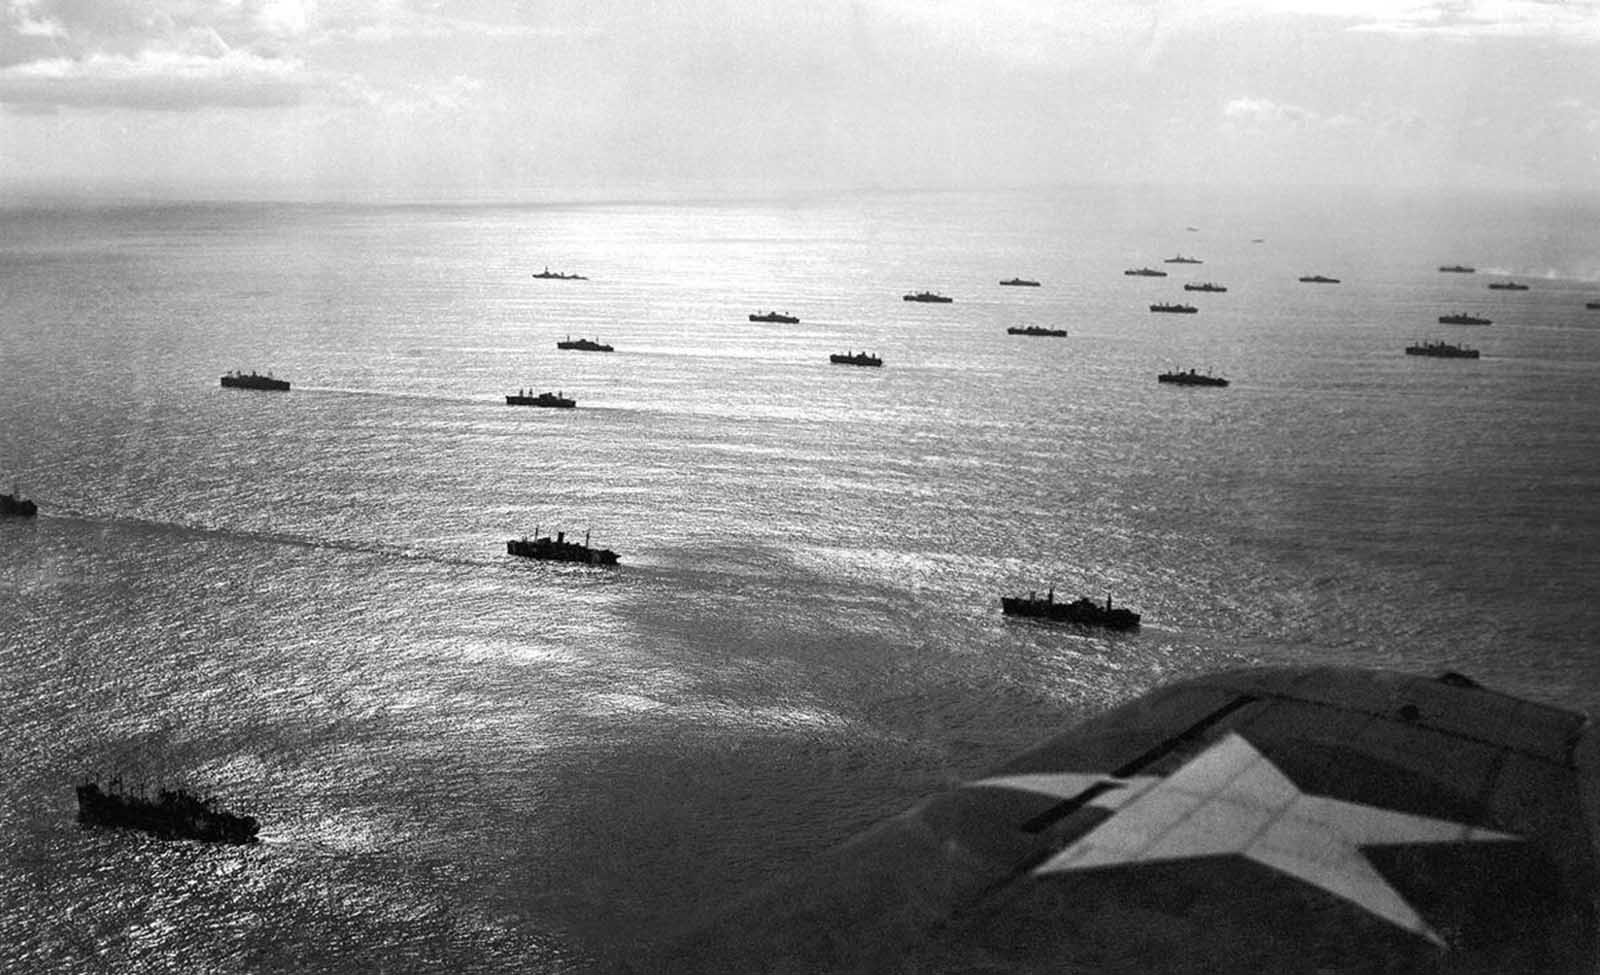 An Allied convoy, escorted by sea and air, plowed through the seas toward French North African possessions near Casablanca, French Morocco, in November of 1942, part of Operation Torch, the large British-American invasion of French North Africa.